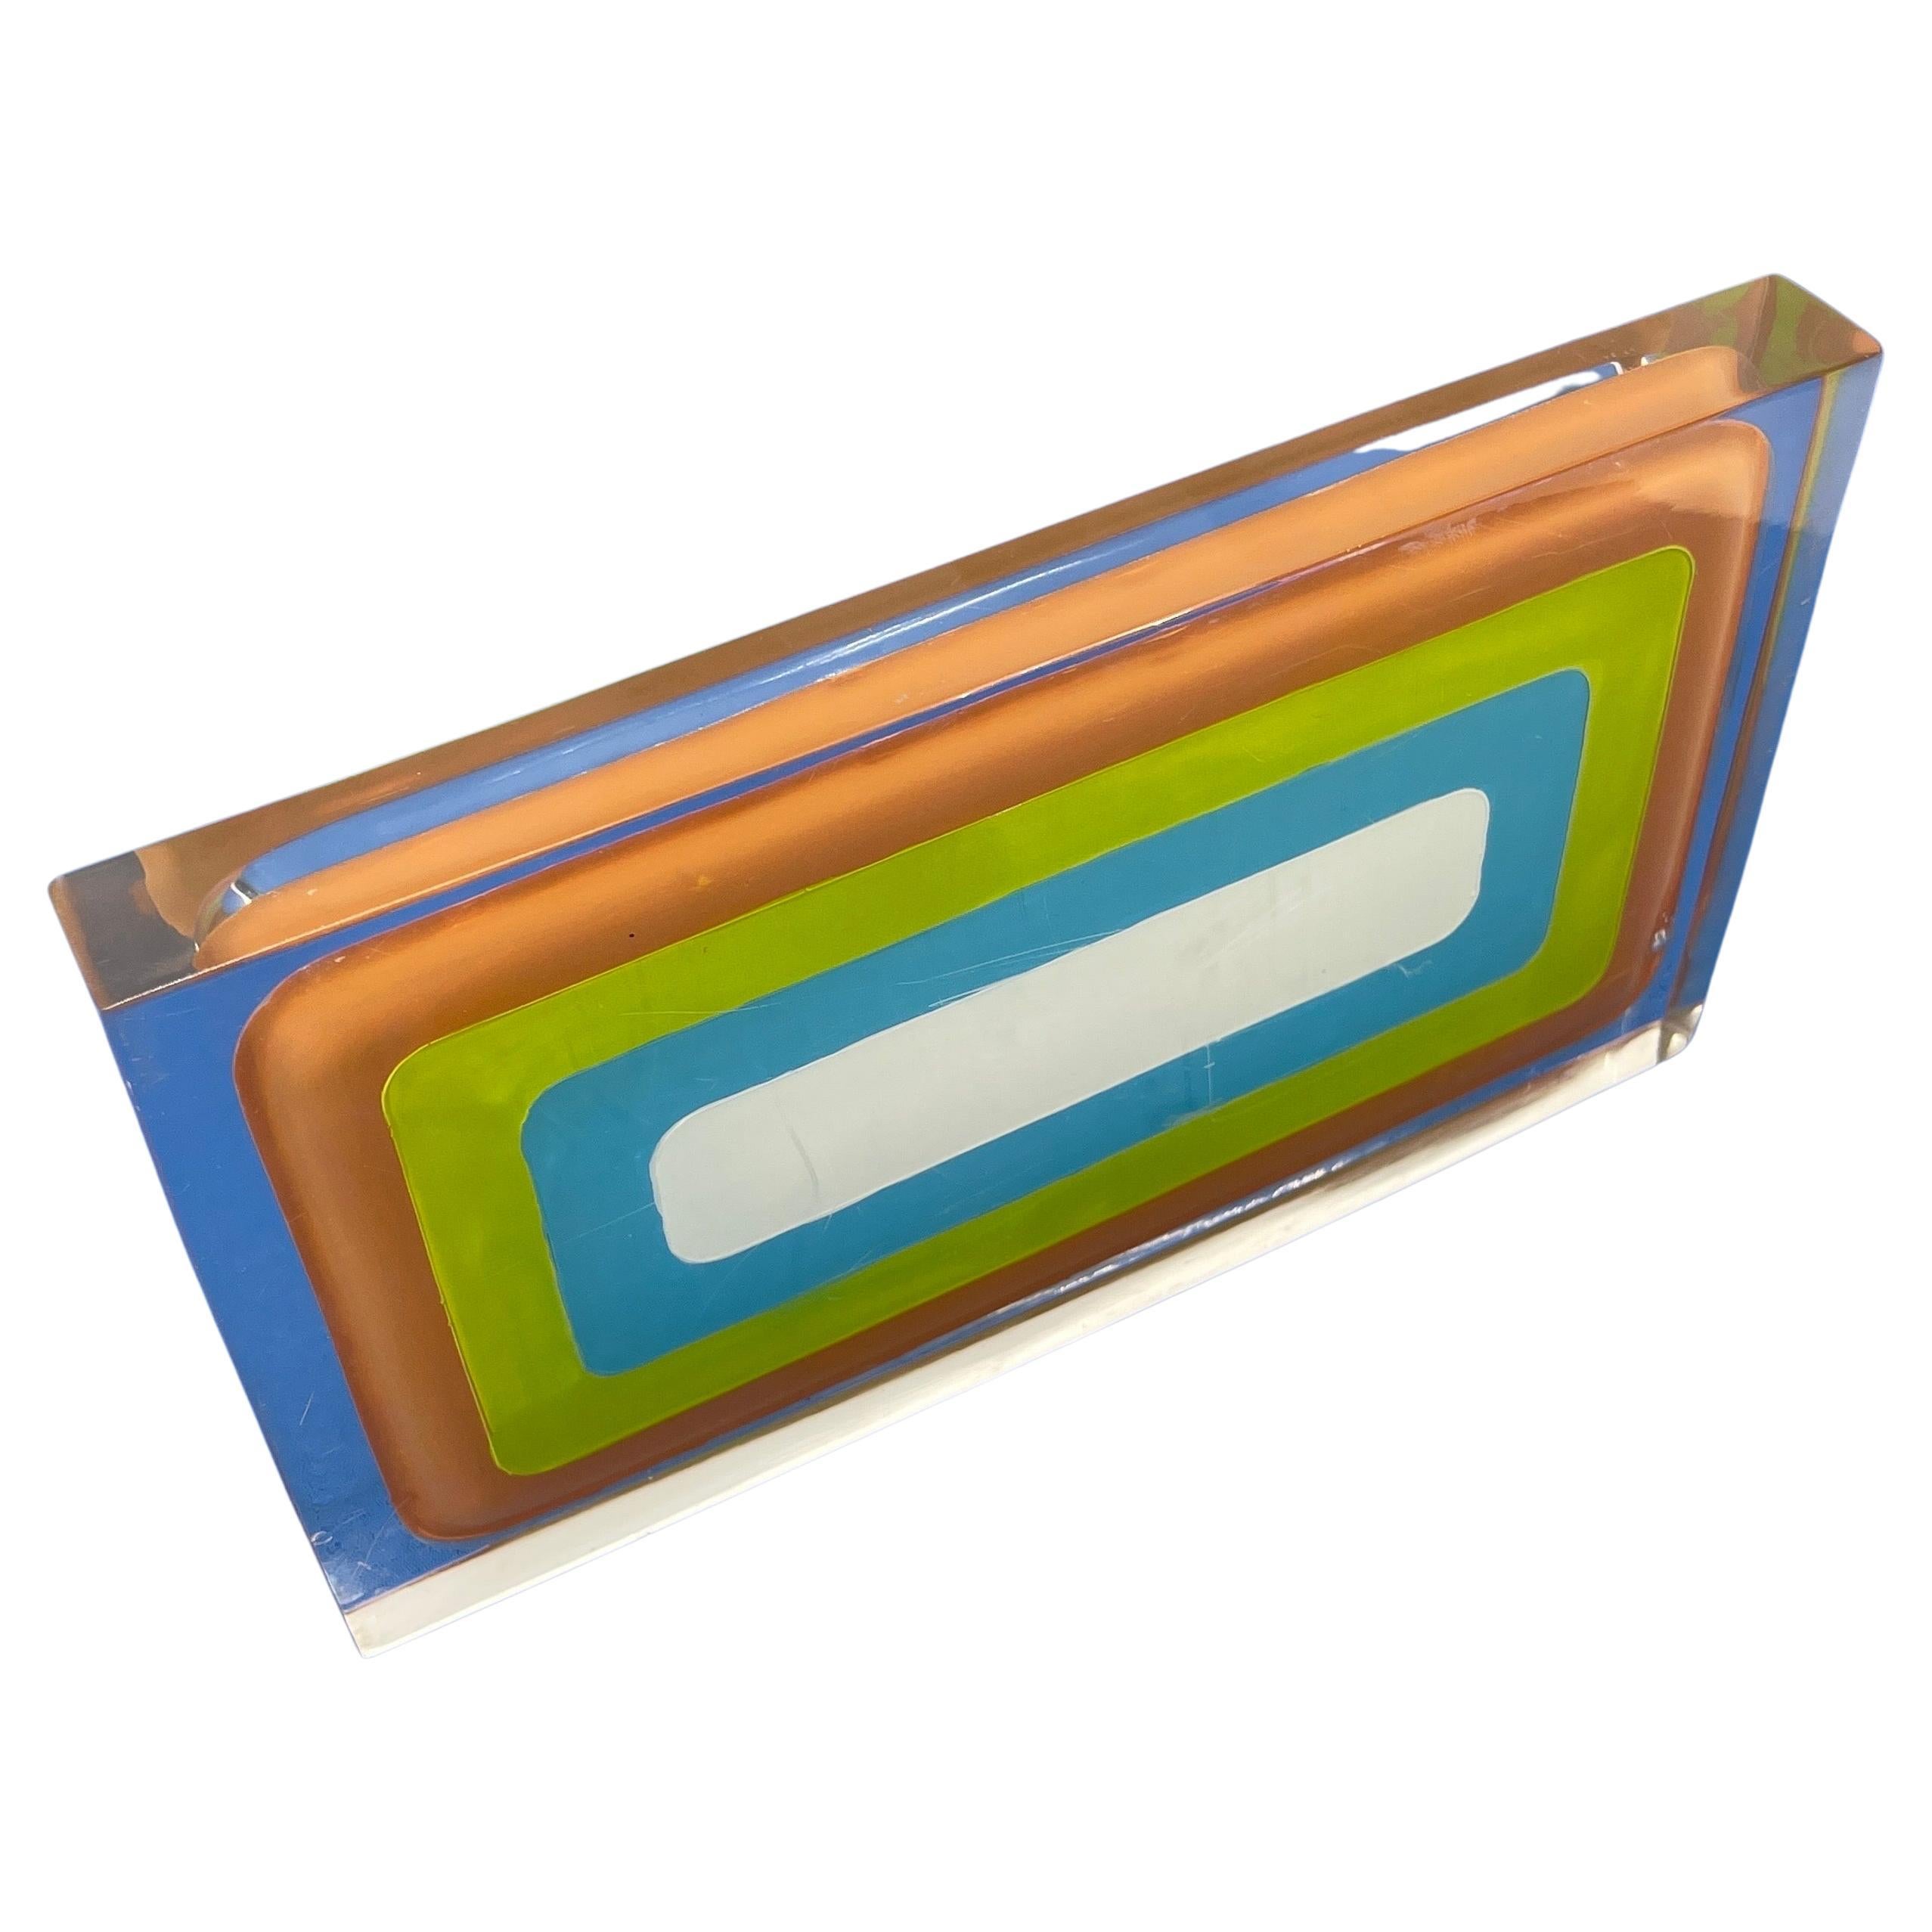 Vintage Rainbow-colored Rectanular Thick Lucite Tray, Mid-Century Modern Italy.

